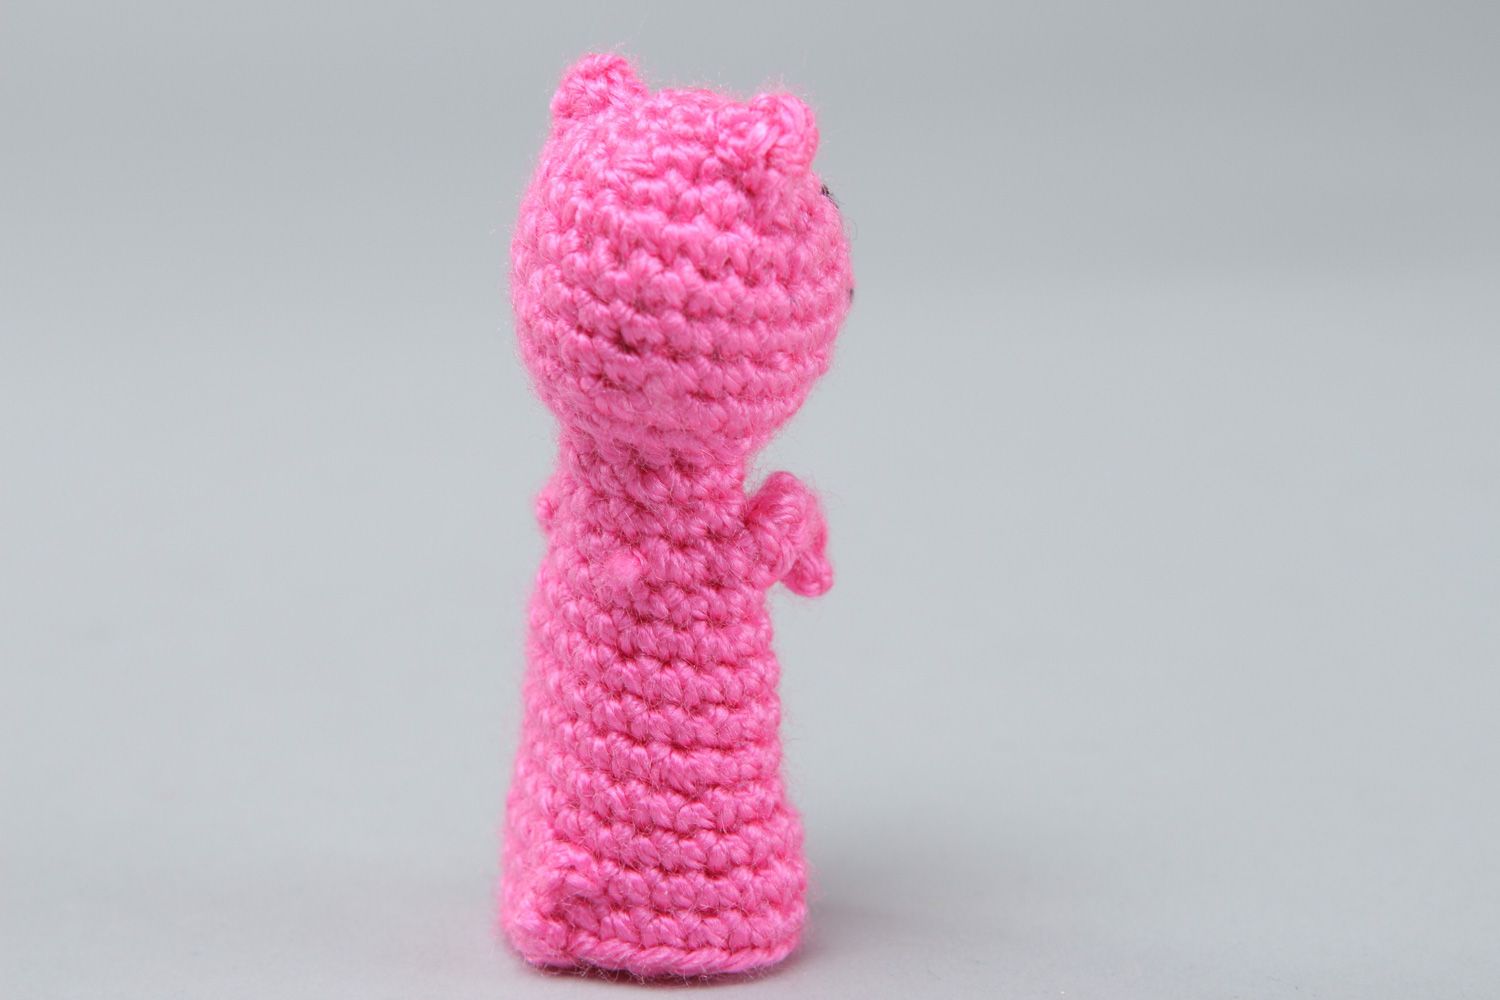 Handmade finger puppet in the shape of pink pig crocheted of acrylic threads photo 2